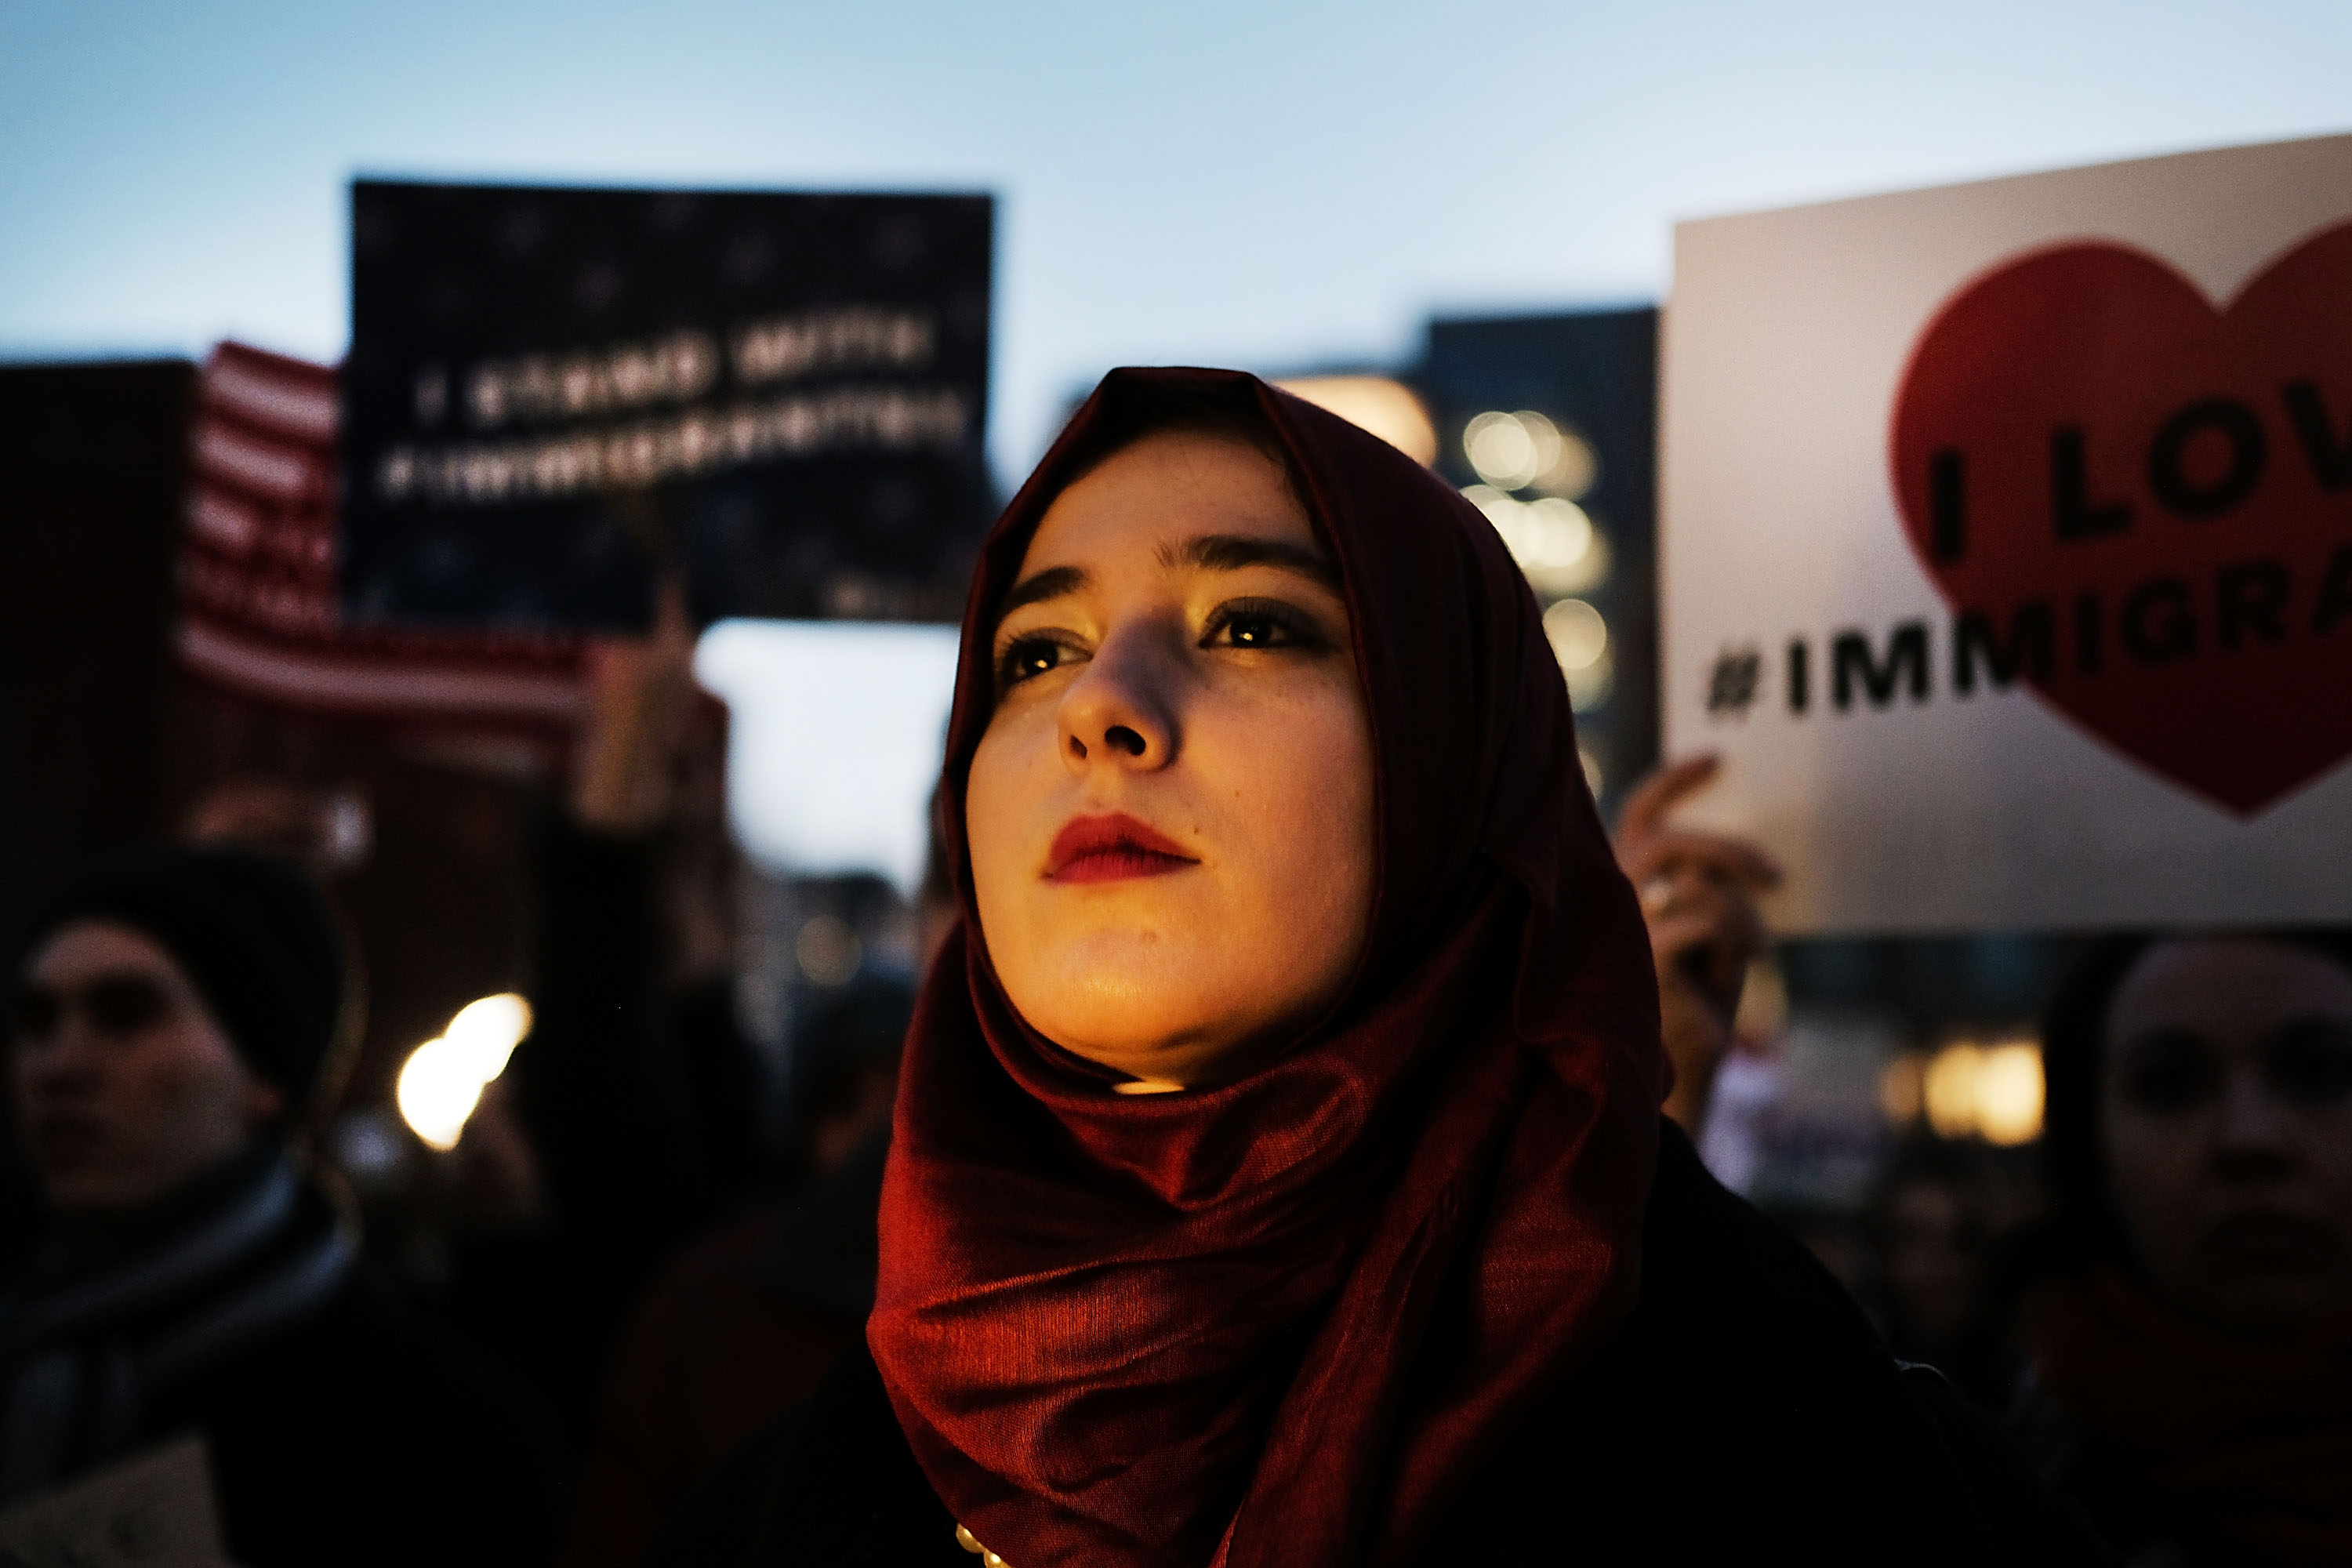 Hundreds of people attend an evening rally at Washington Square Park in support of Muslims, immigrants and against the building of a wall along the Mexican border on January 25, 2017 in New York City.   (Spencer Platt--Getty Images) (Spencer Platt&mdash;Getty Images)